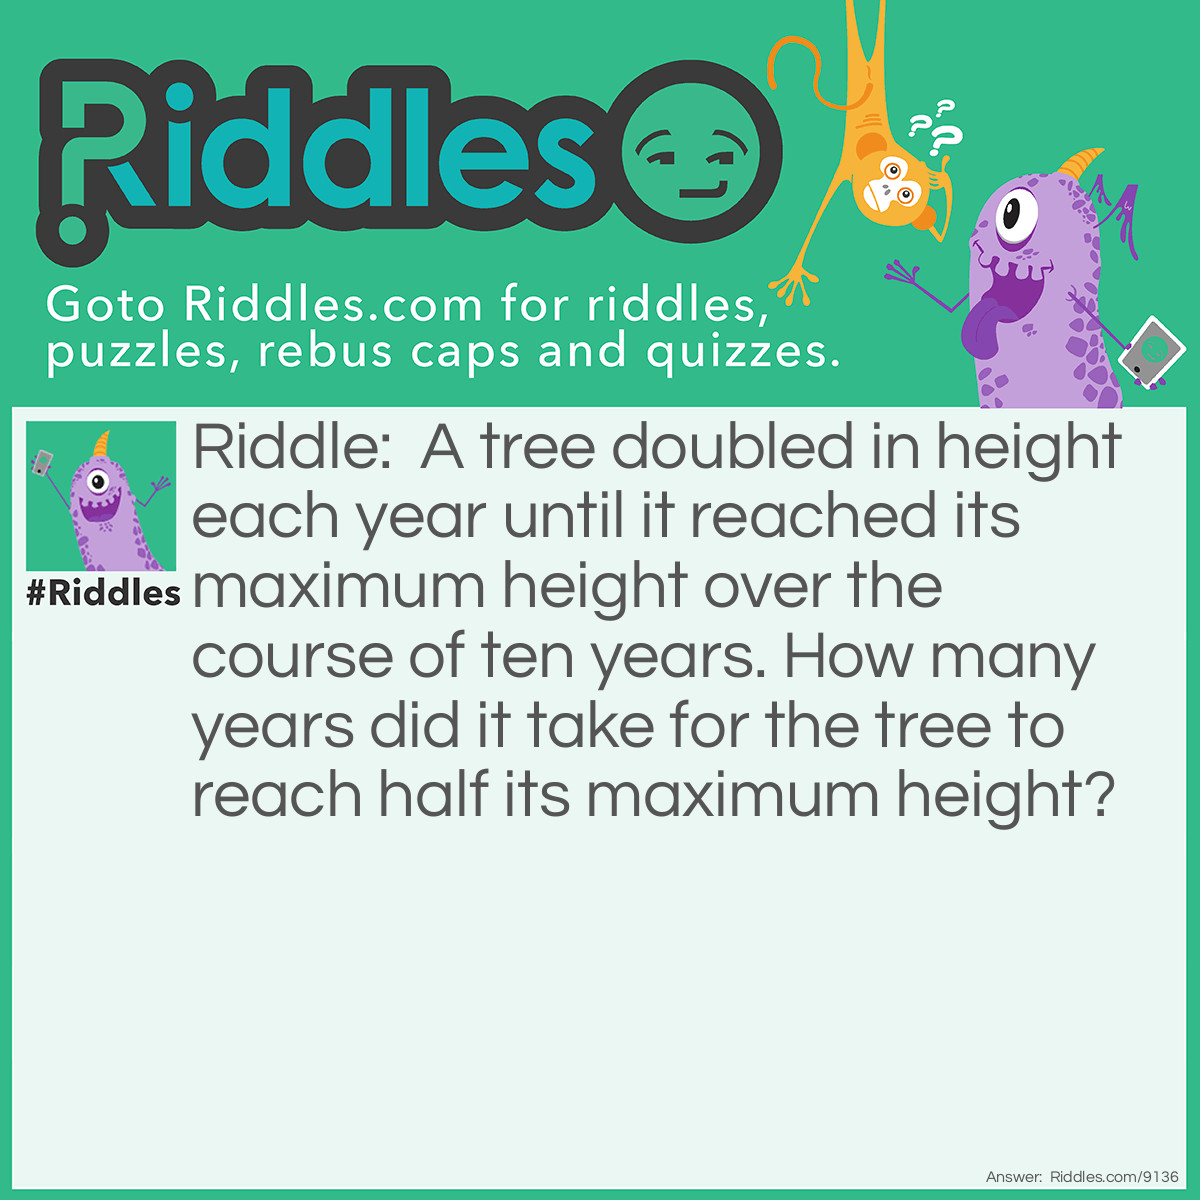 Riddle: A tree doubled in height each year until it reached its maximum height over the course of ten years. How many years did it take for the tree to reach half its maximum height? Answer: Nine Years